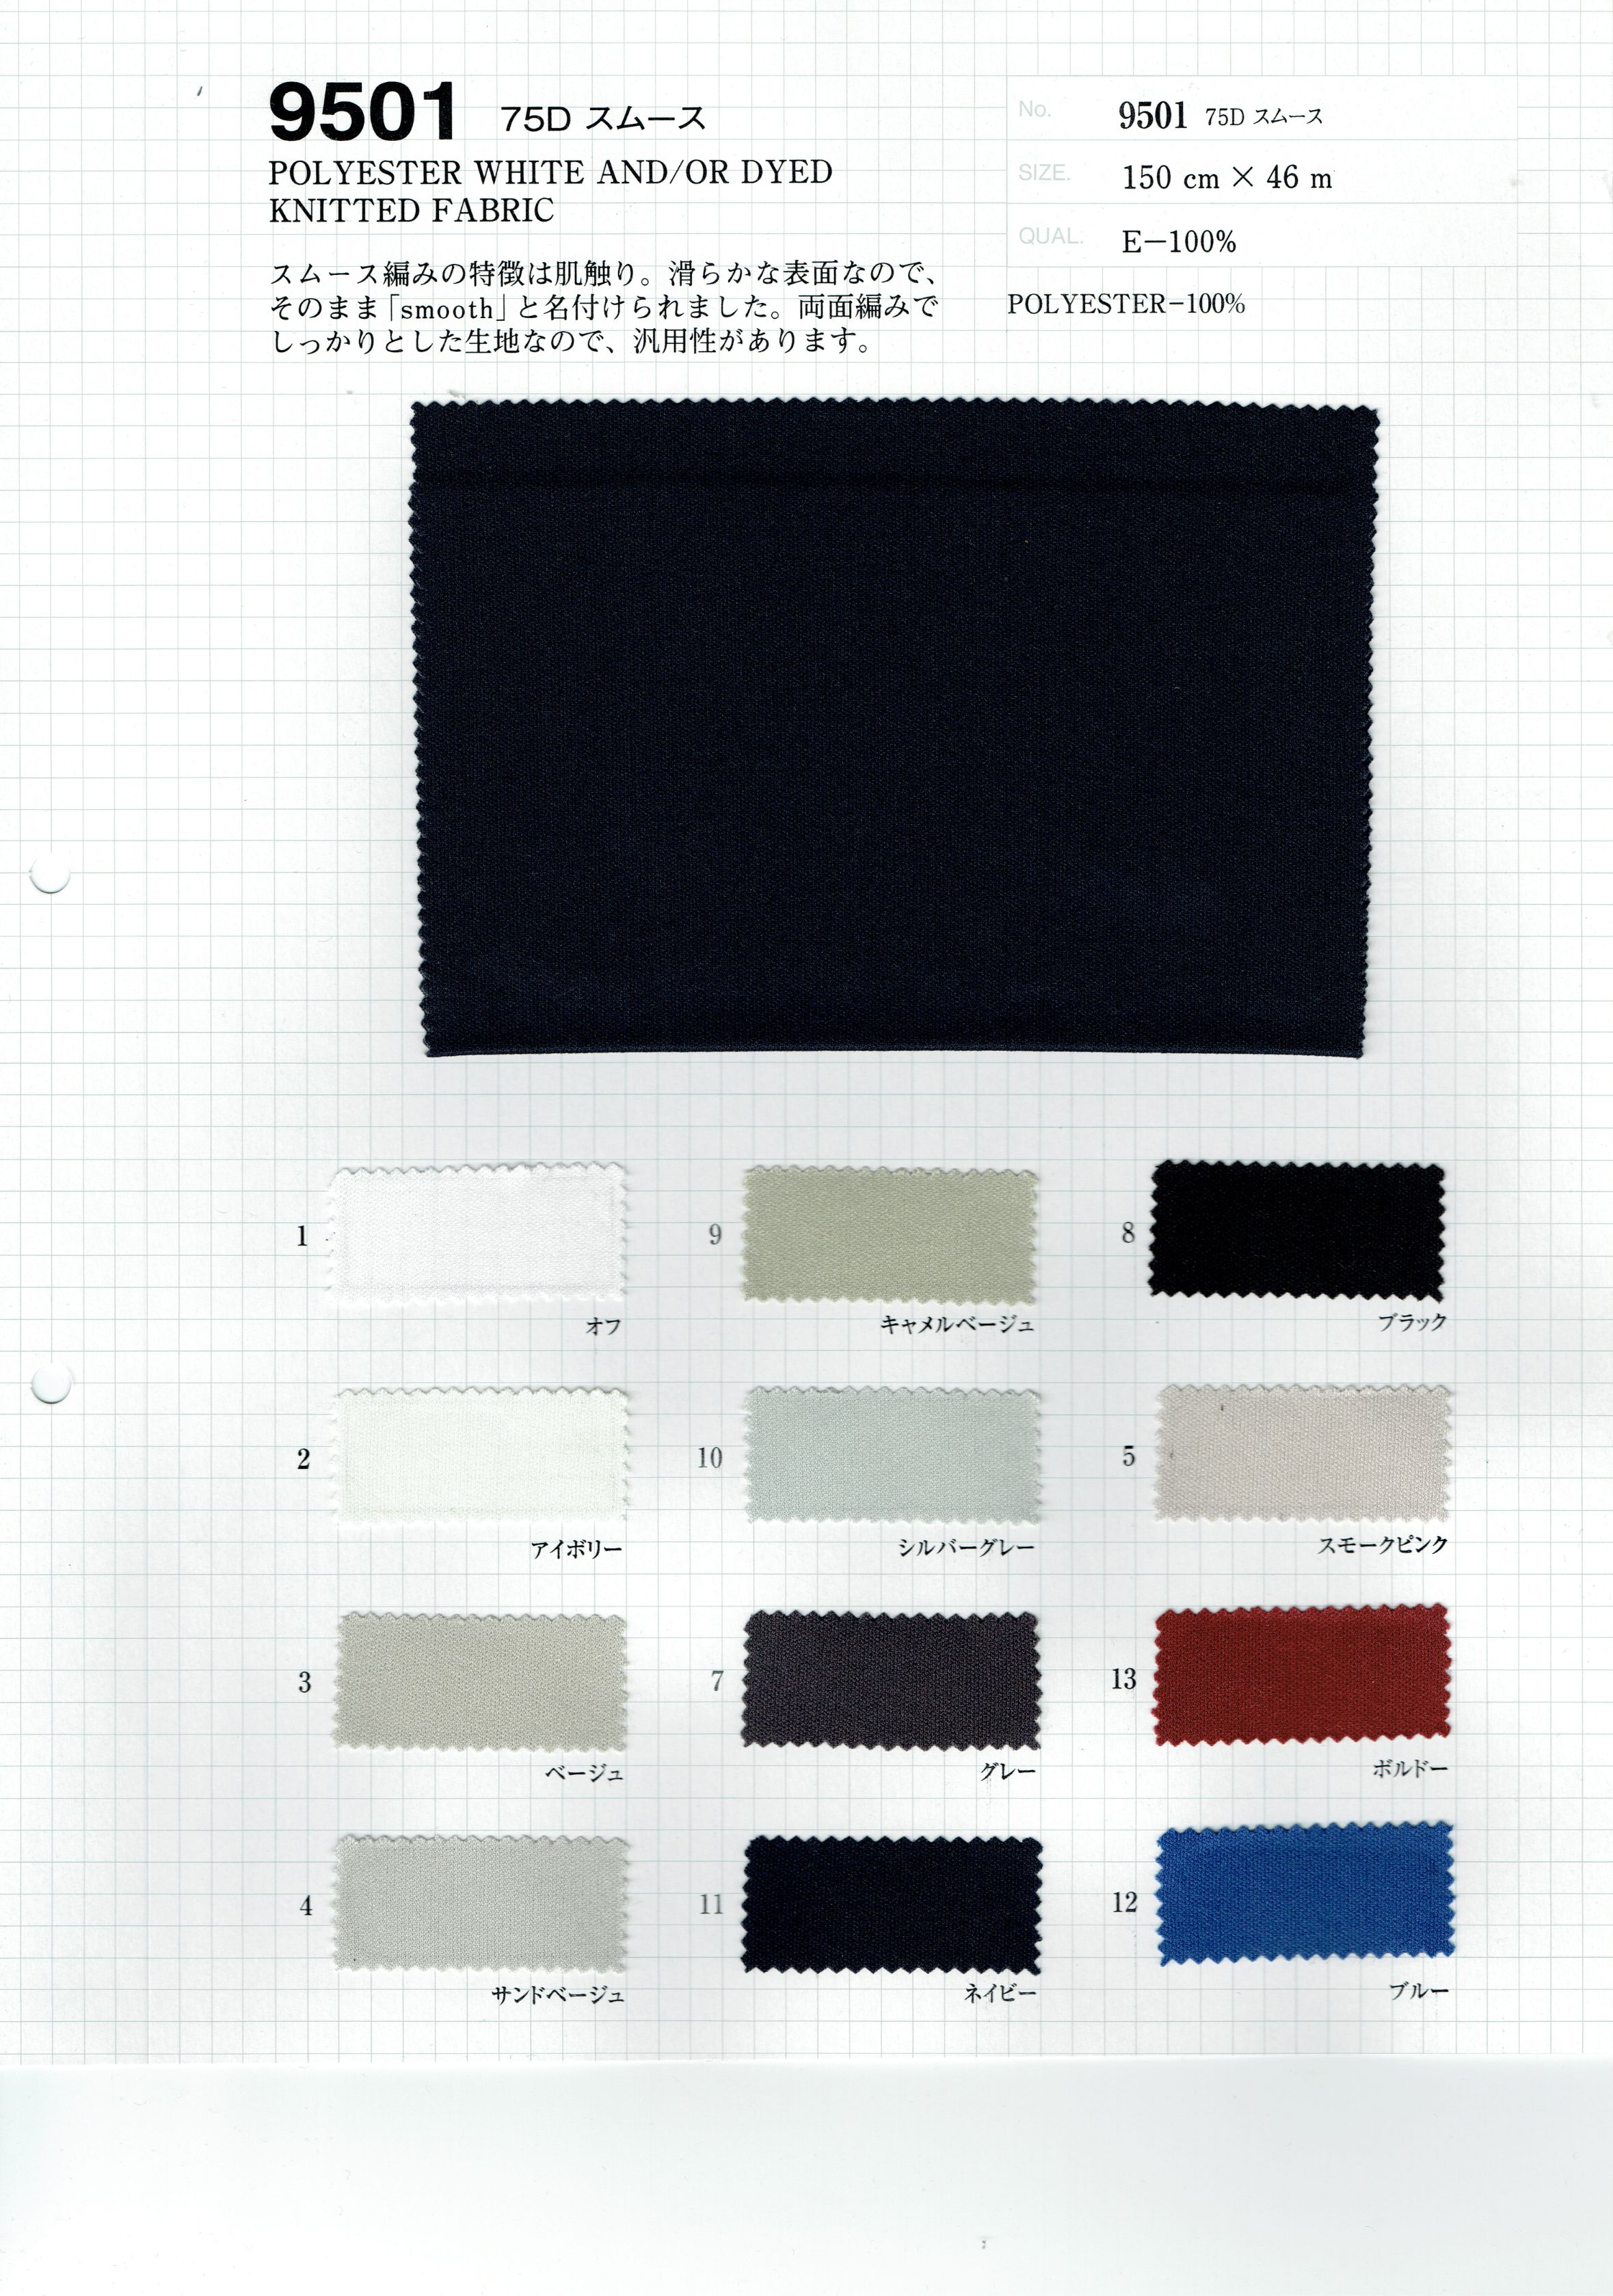 View 100% POLYESTER WHITE AND/OR DYED KNITTED FABRIC